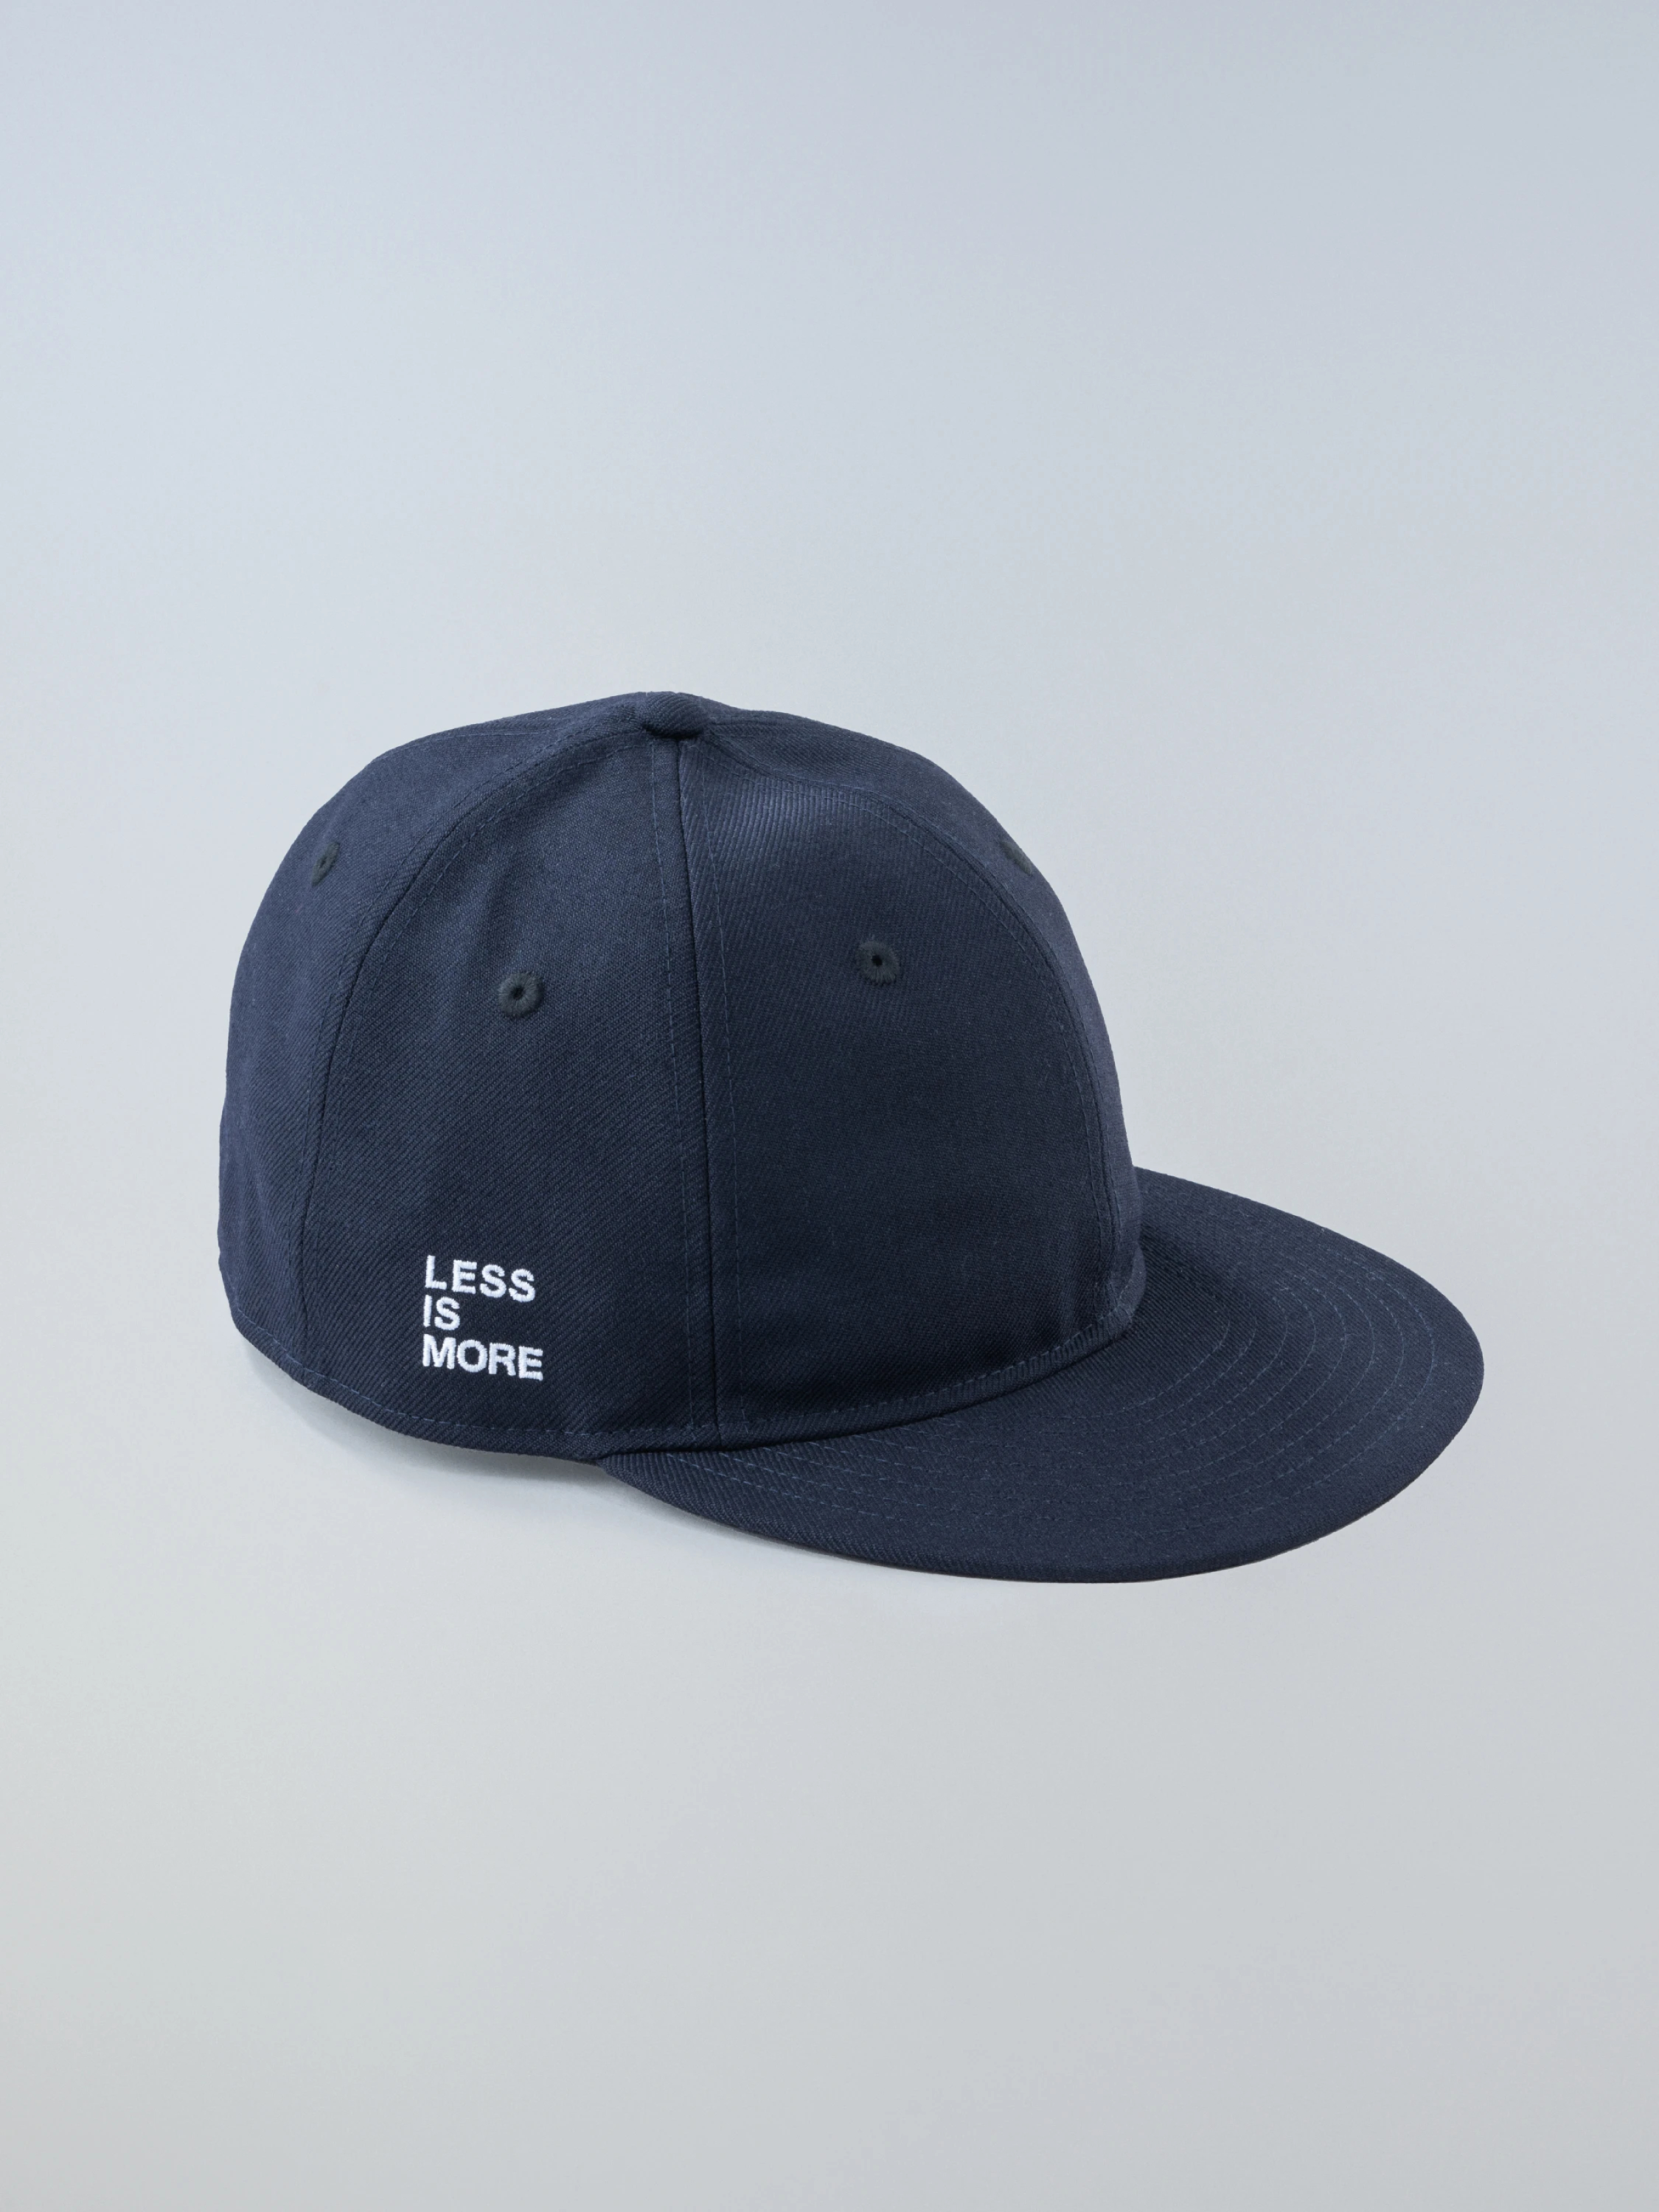 59FIFTY Classic BB Cap | OTHERS | KAPTAIN SUNSHINE ONLINE STORE